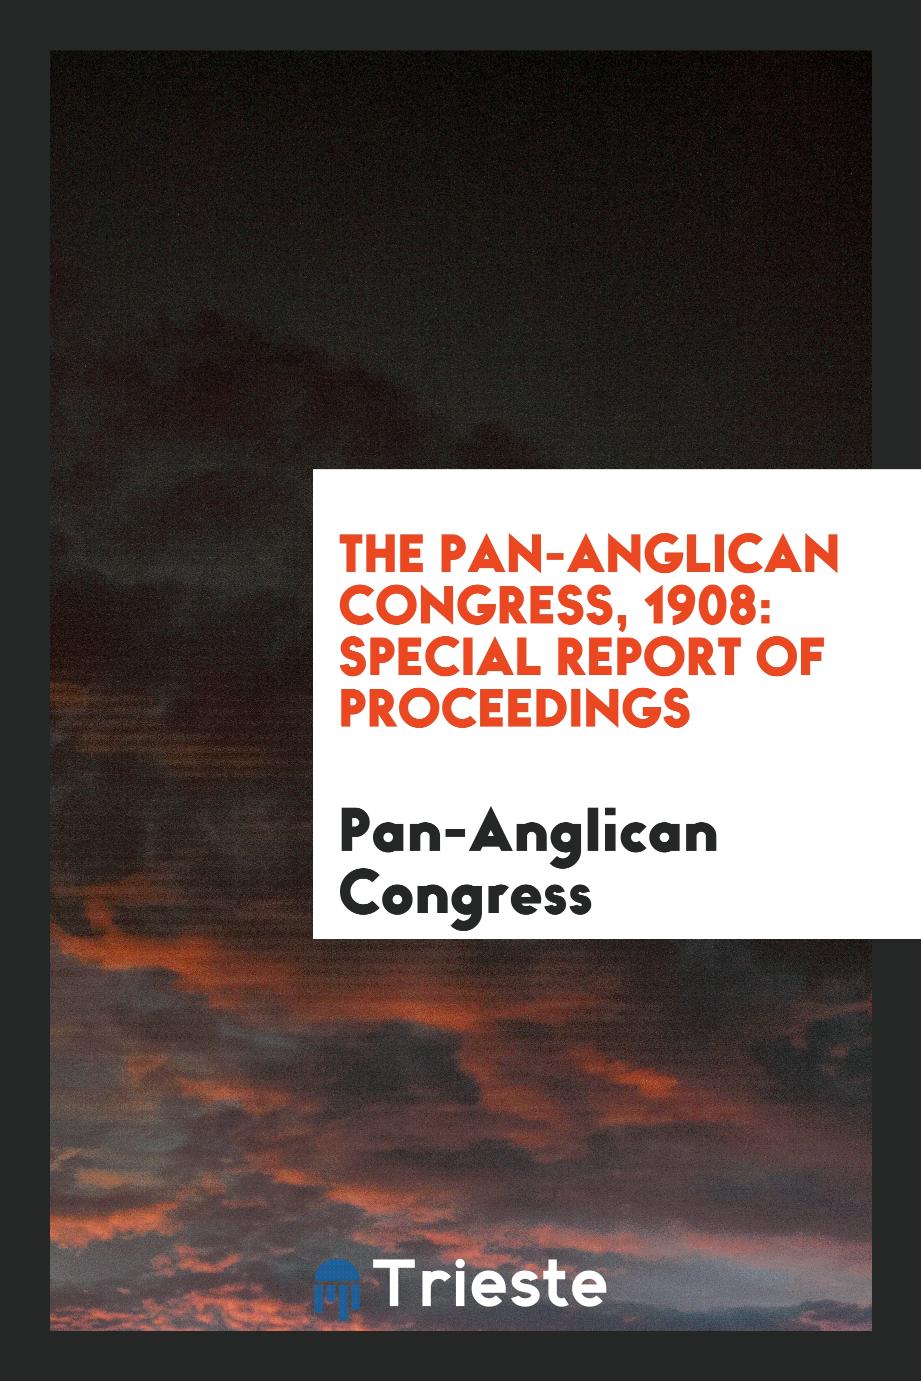 The Pan-Anglican Congress, 1908: Special Report of Proceedings